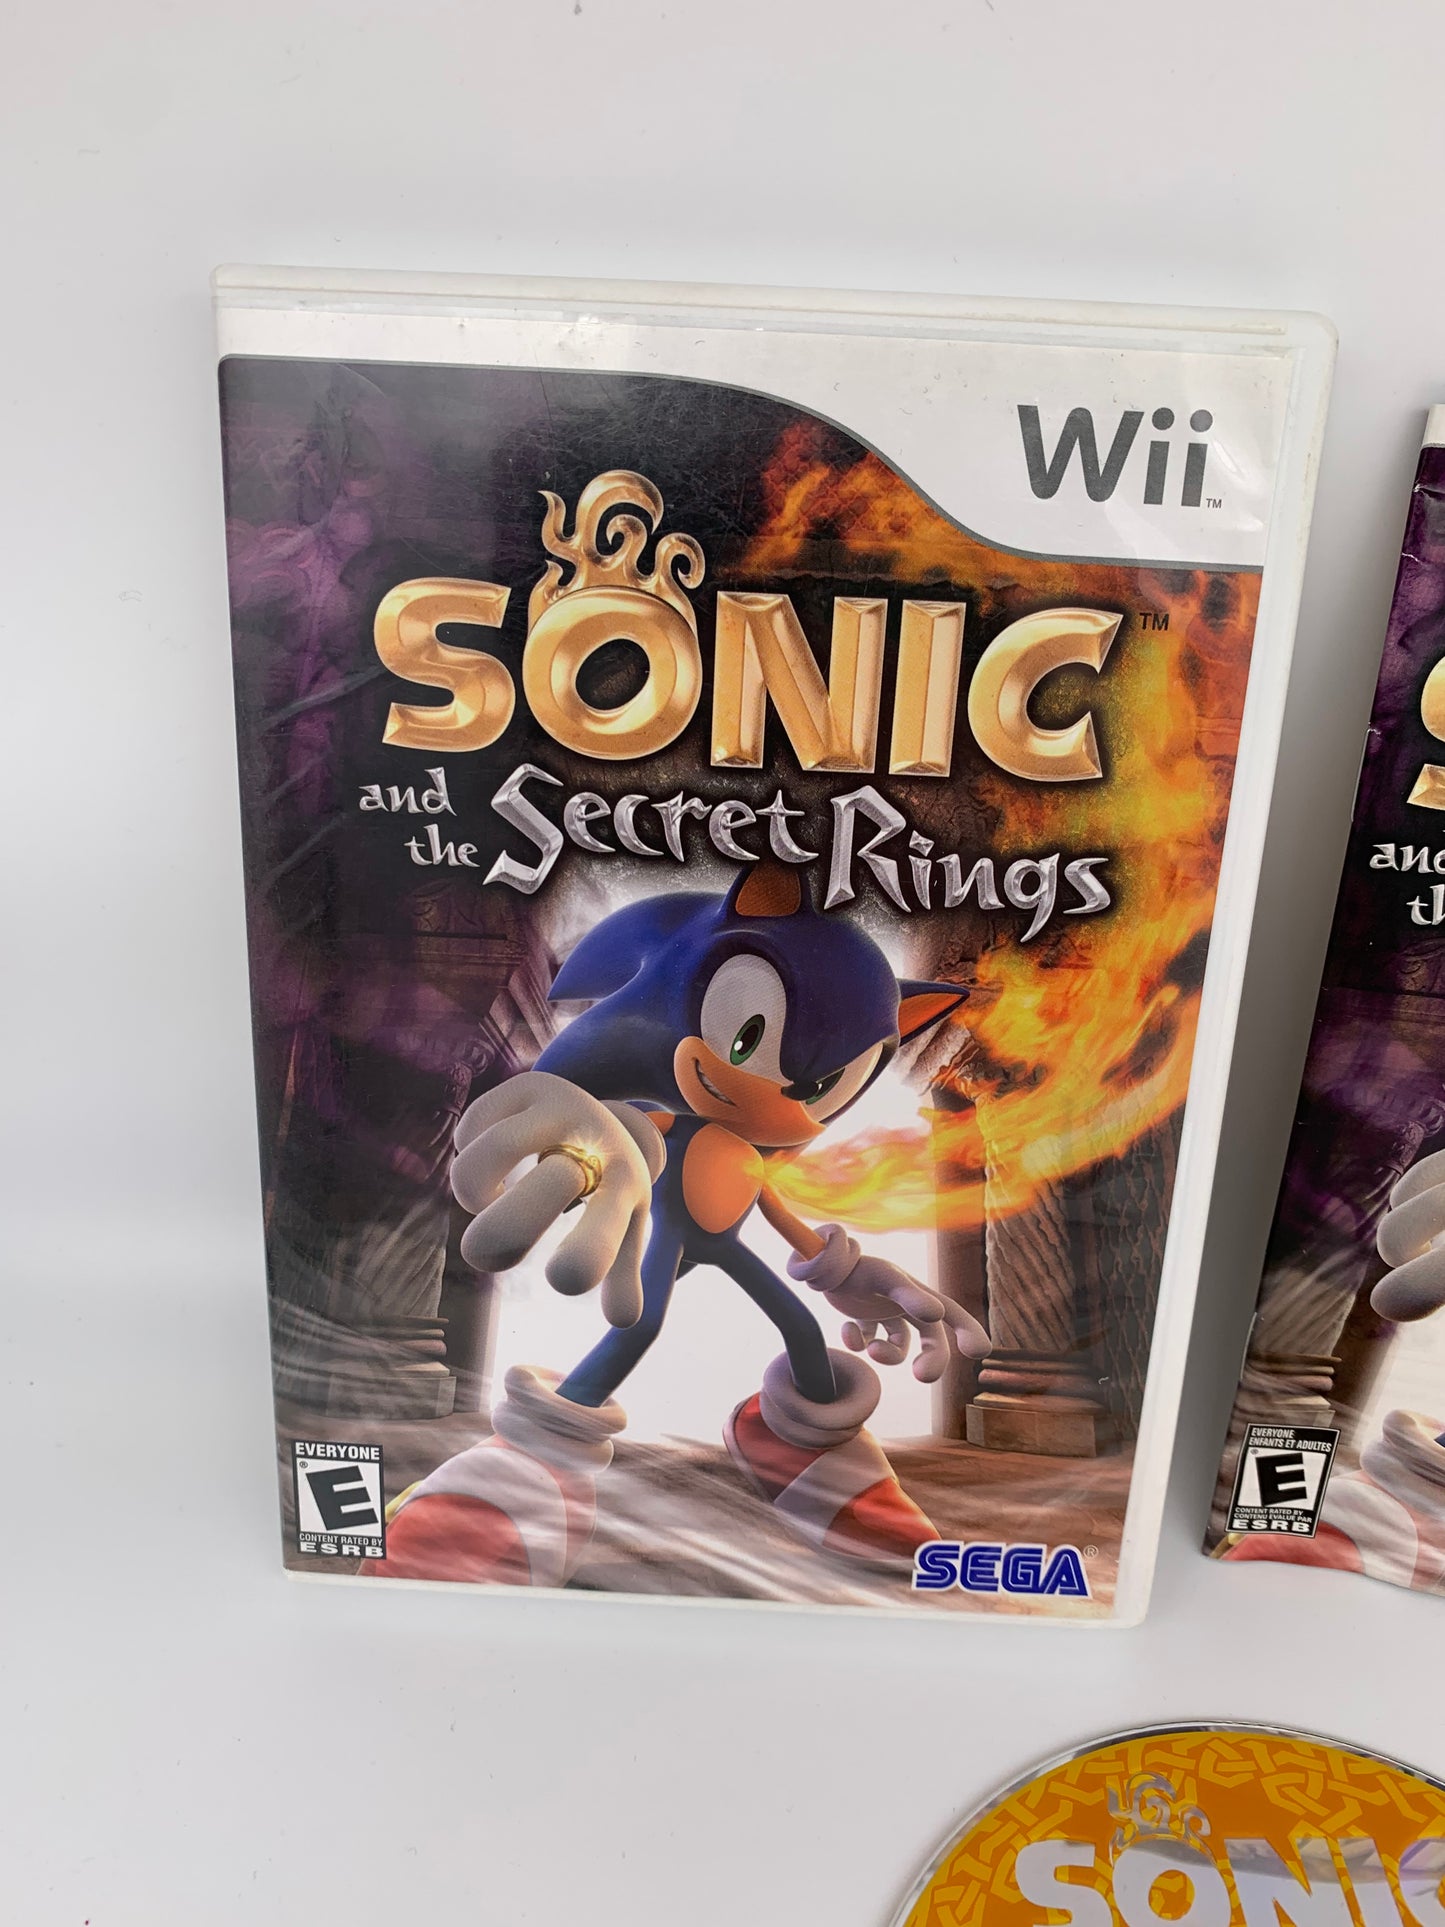 NiNTENDO Wii | SONiC AND THE SECRET RiNGS